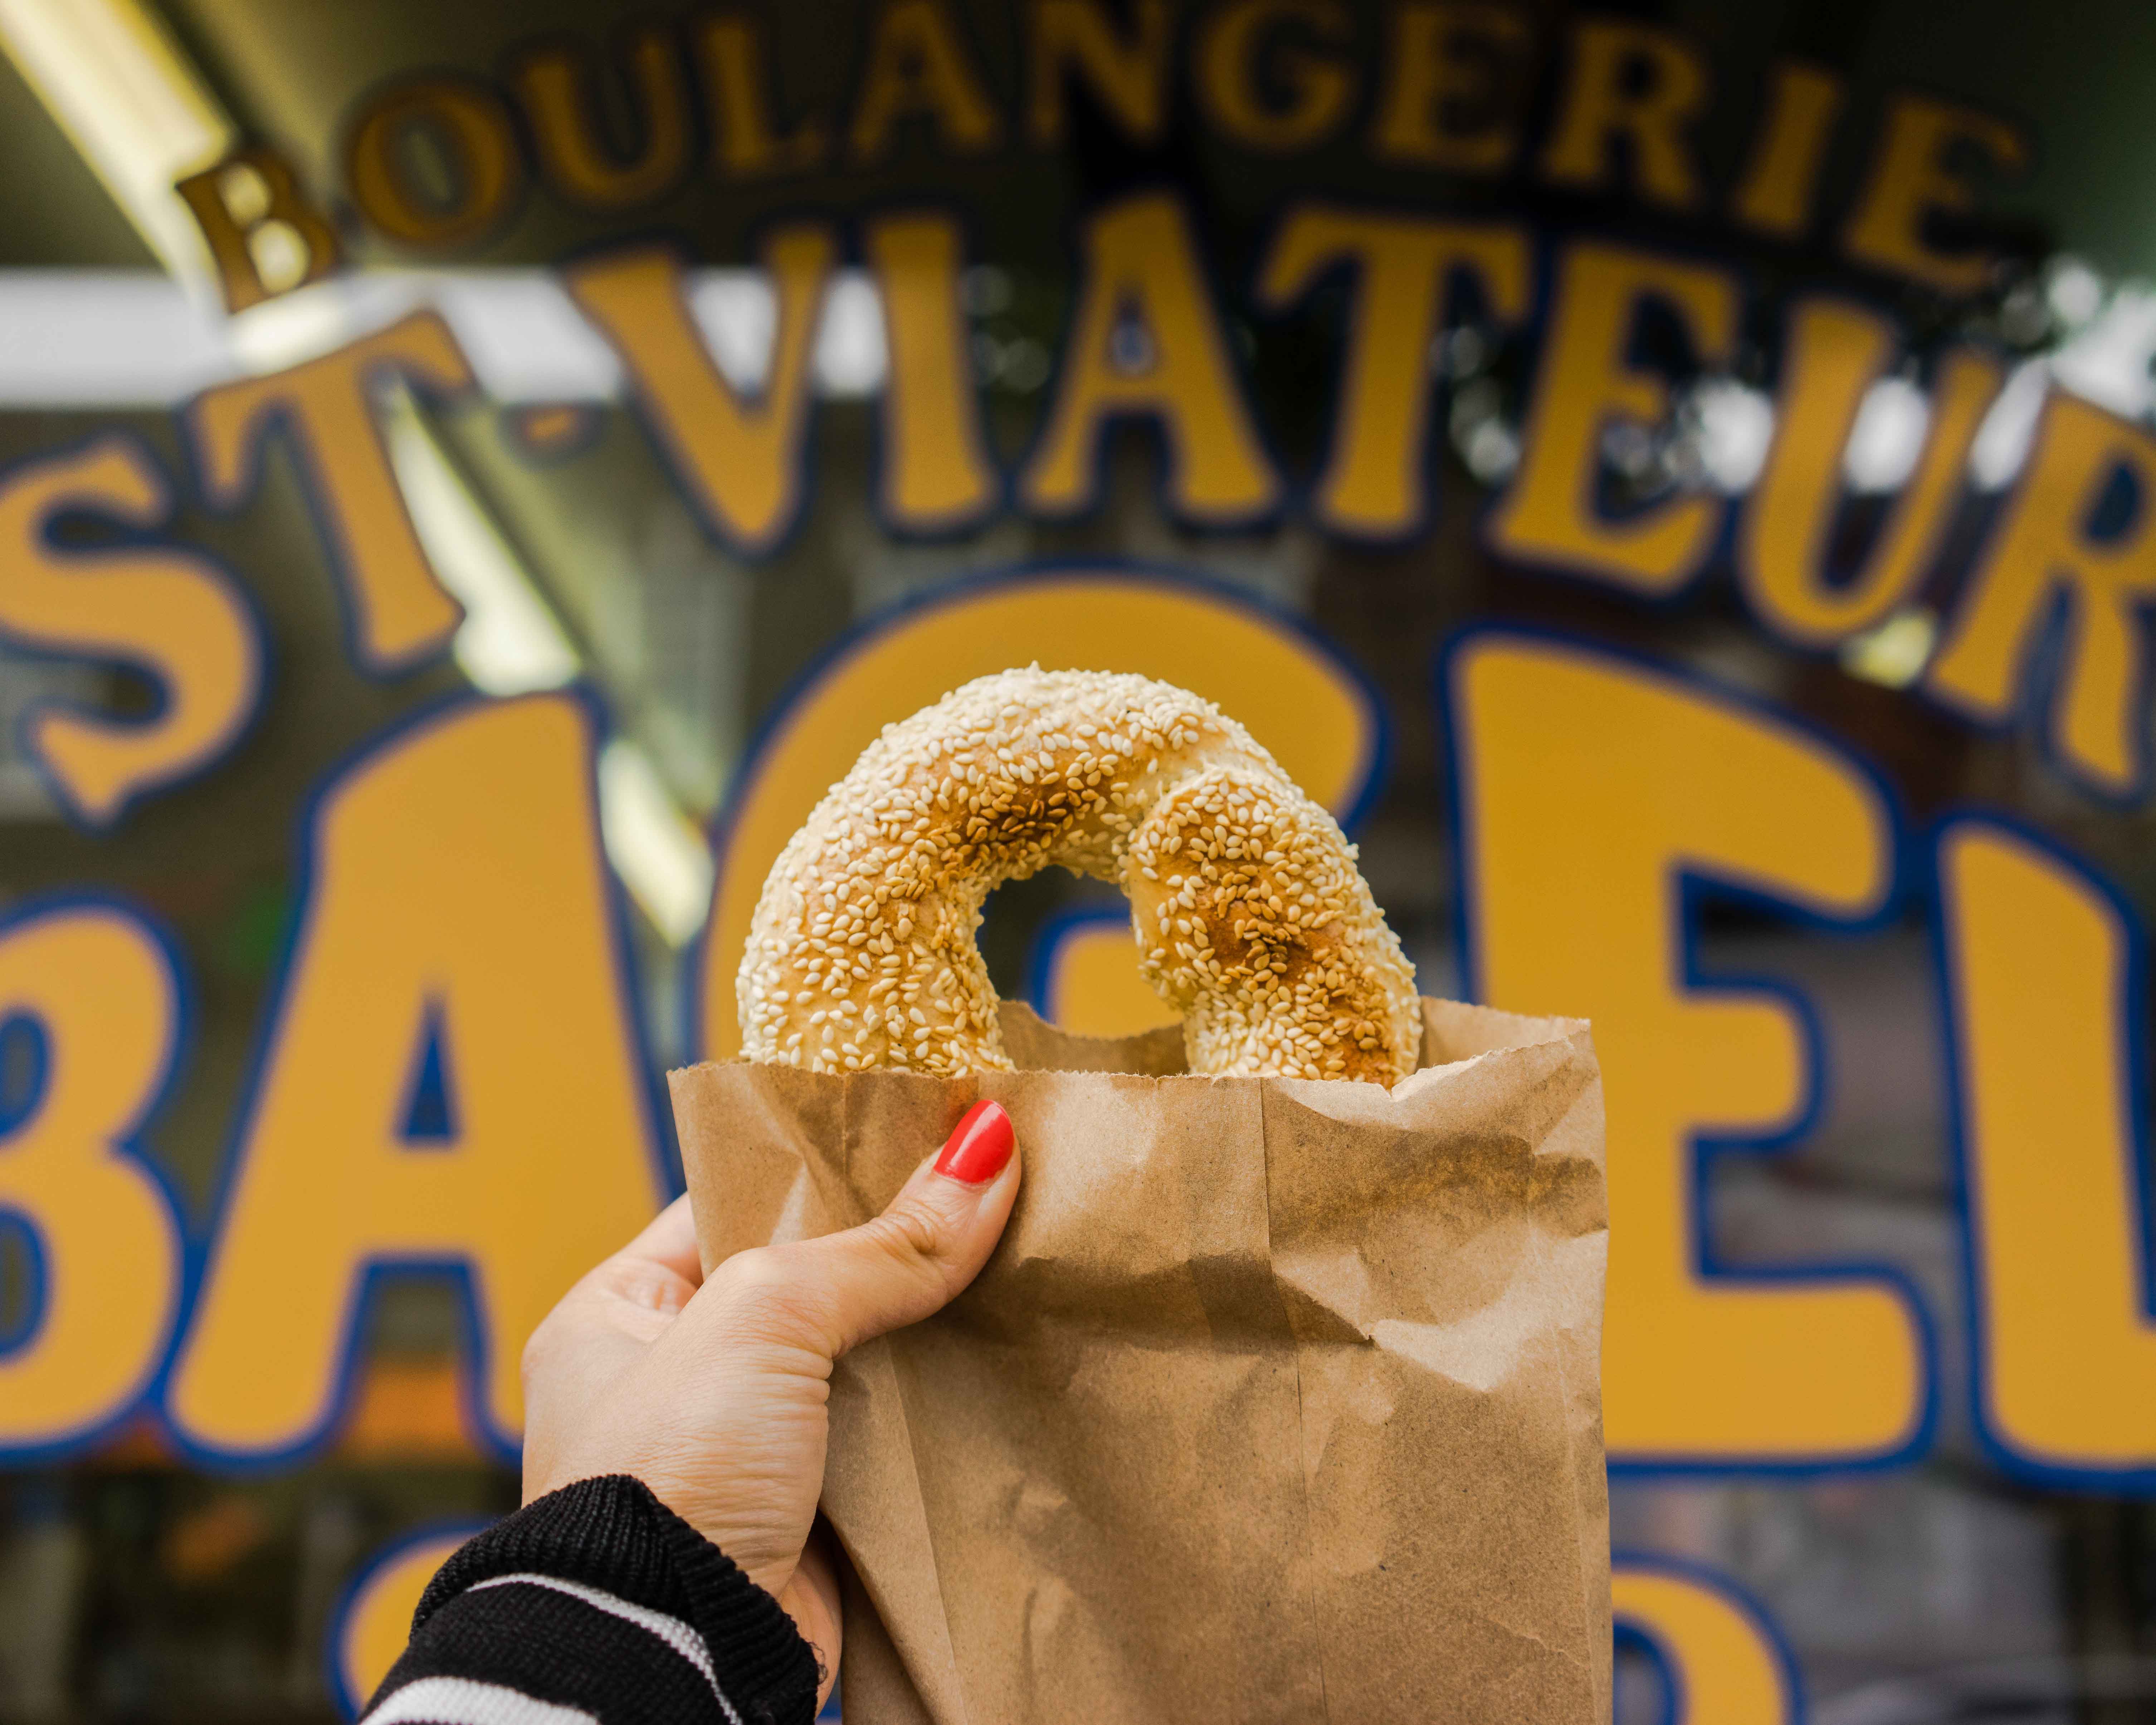 Montreal Travel Guide: holding up a bagel to the camera in Montreal.